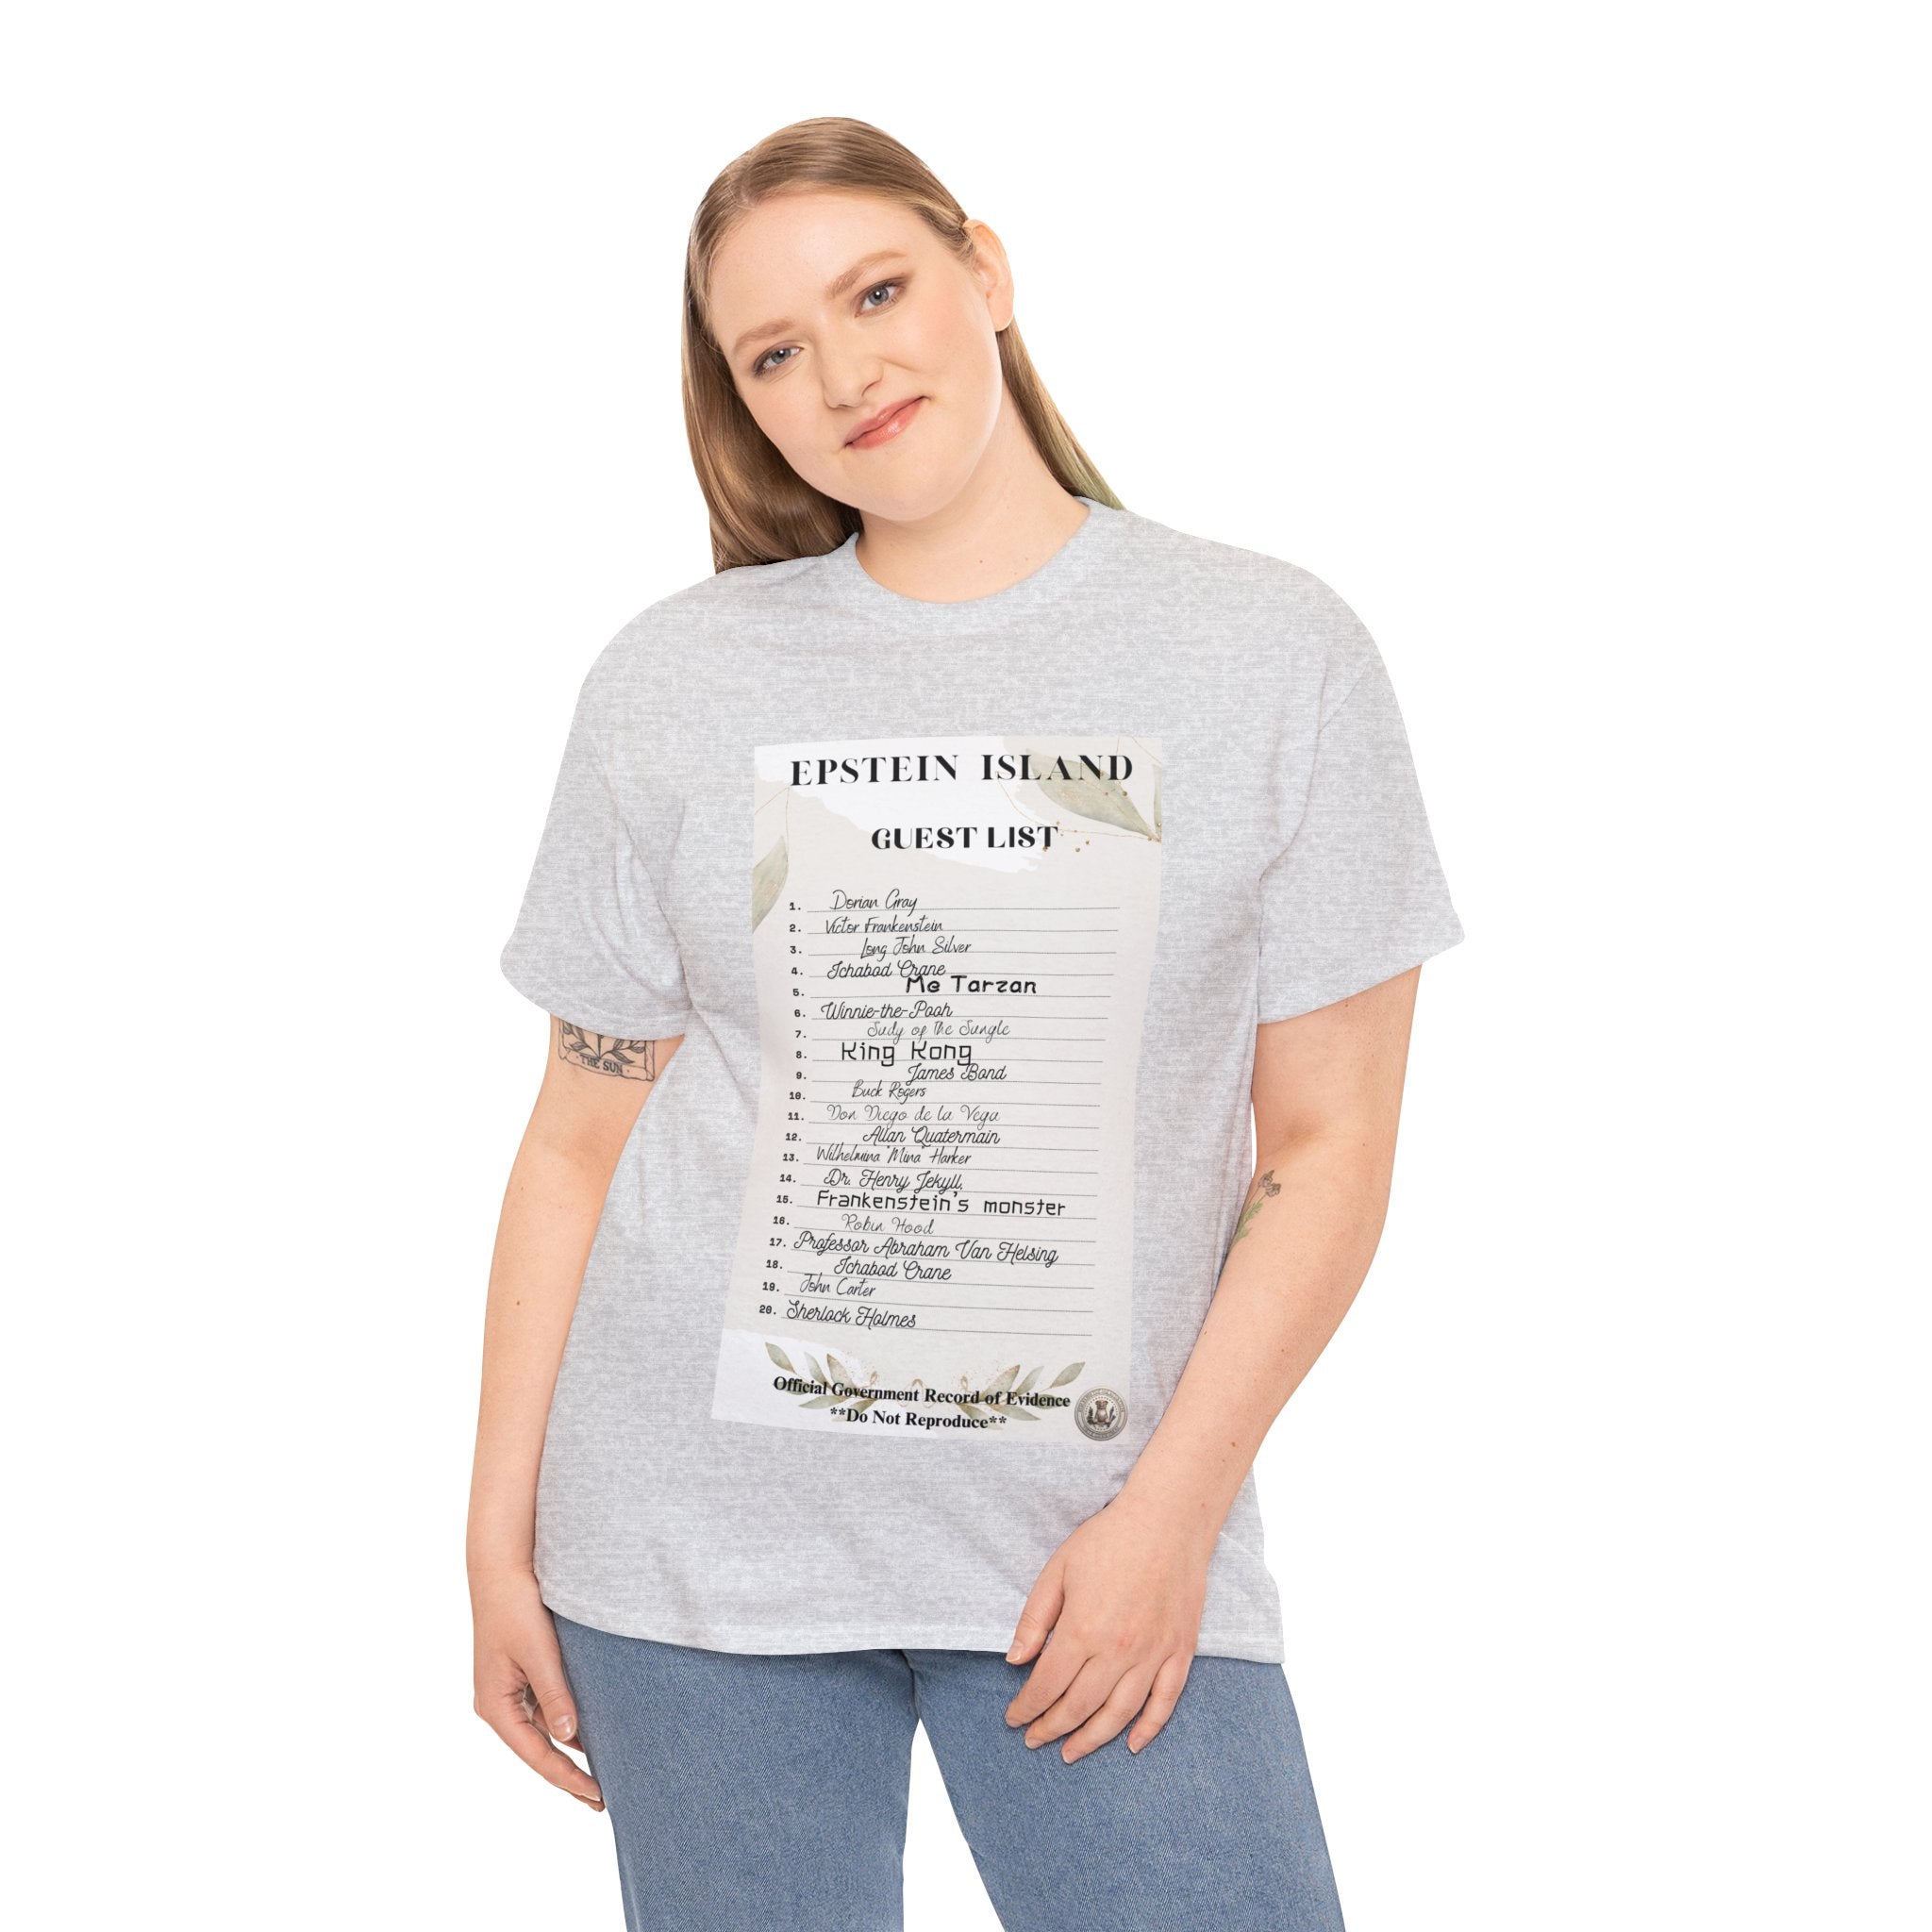 (First Come First Serve - Limited Supply) Creepy Island Baron Guest List" Funny Parody Unisex Heavy Cotton Tee Funny T-Shirt of E-Island Guest List Funny Shirt for Him for Funny Events